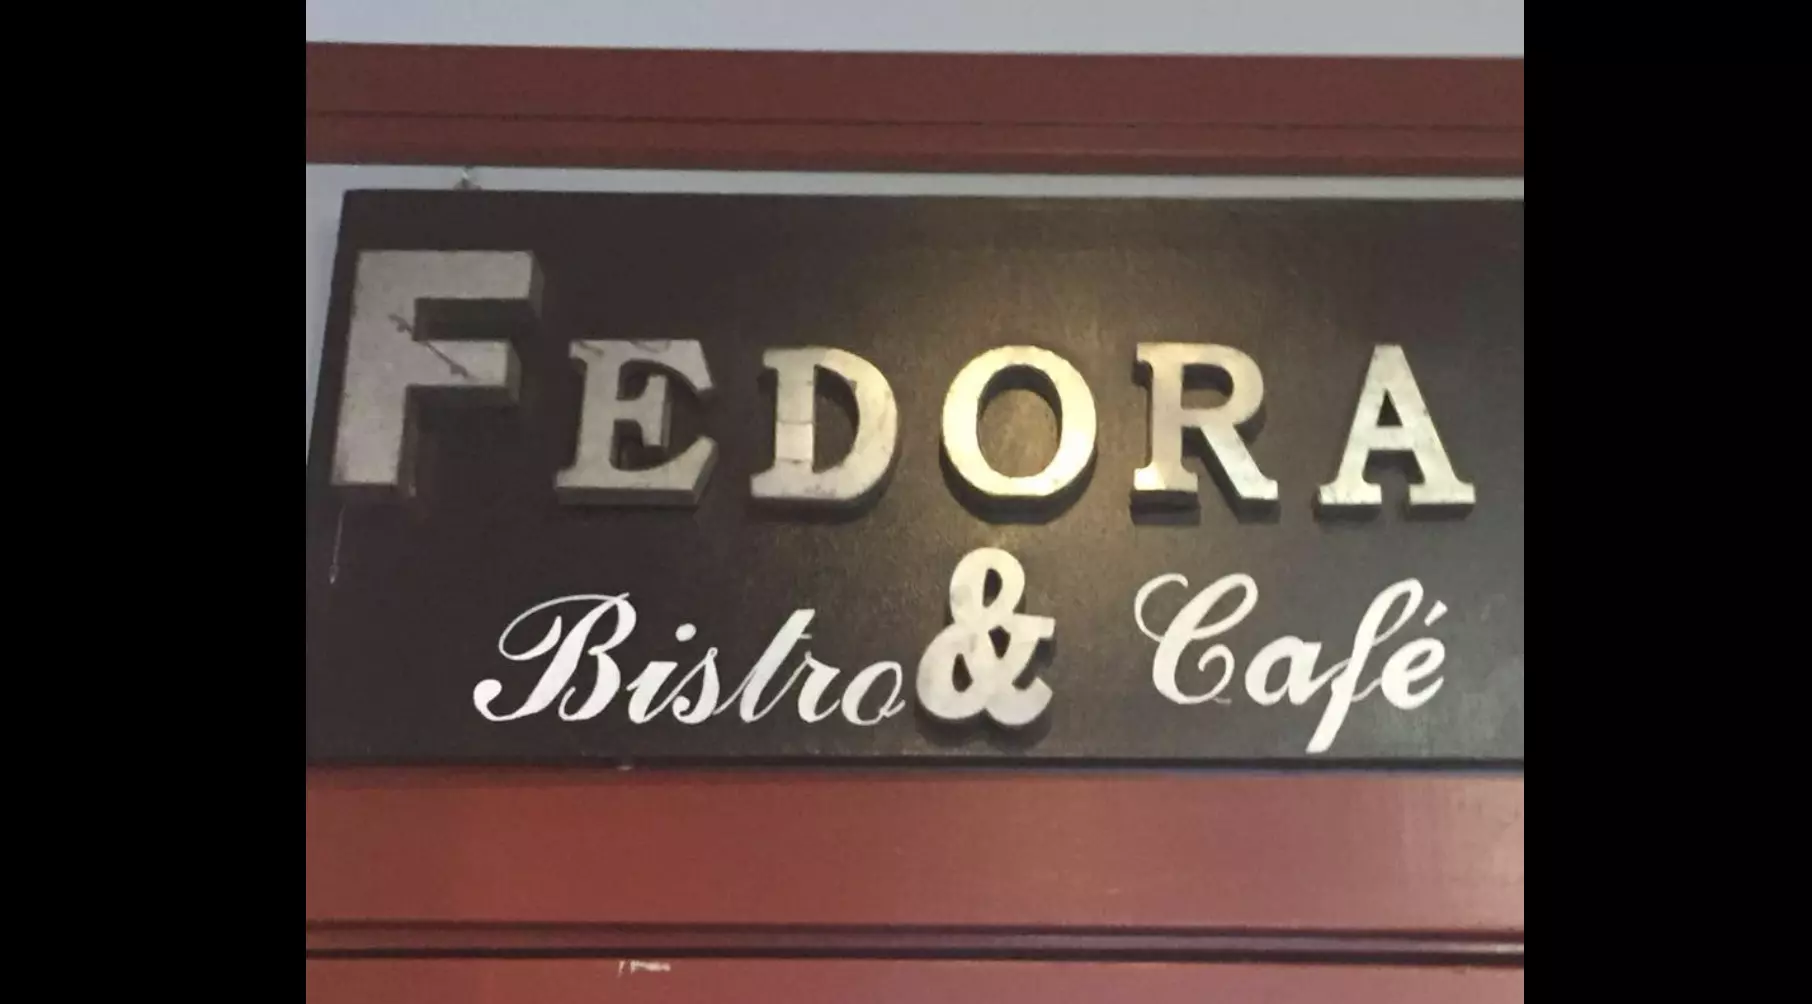 Fedora Cafe in Lawrenceville is Feeding the Community